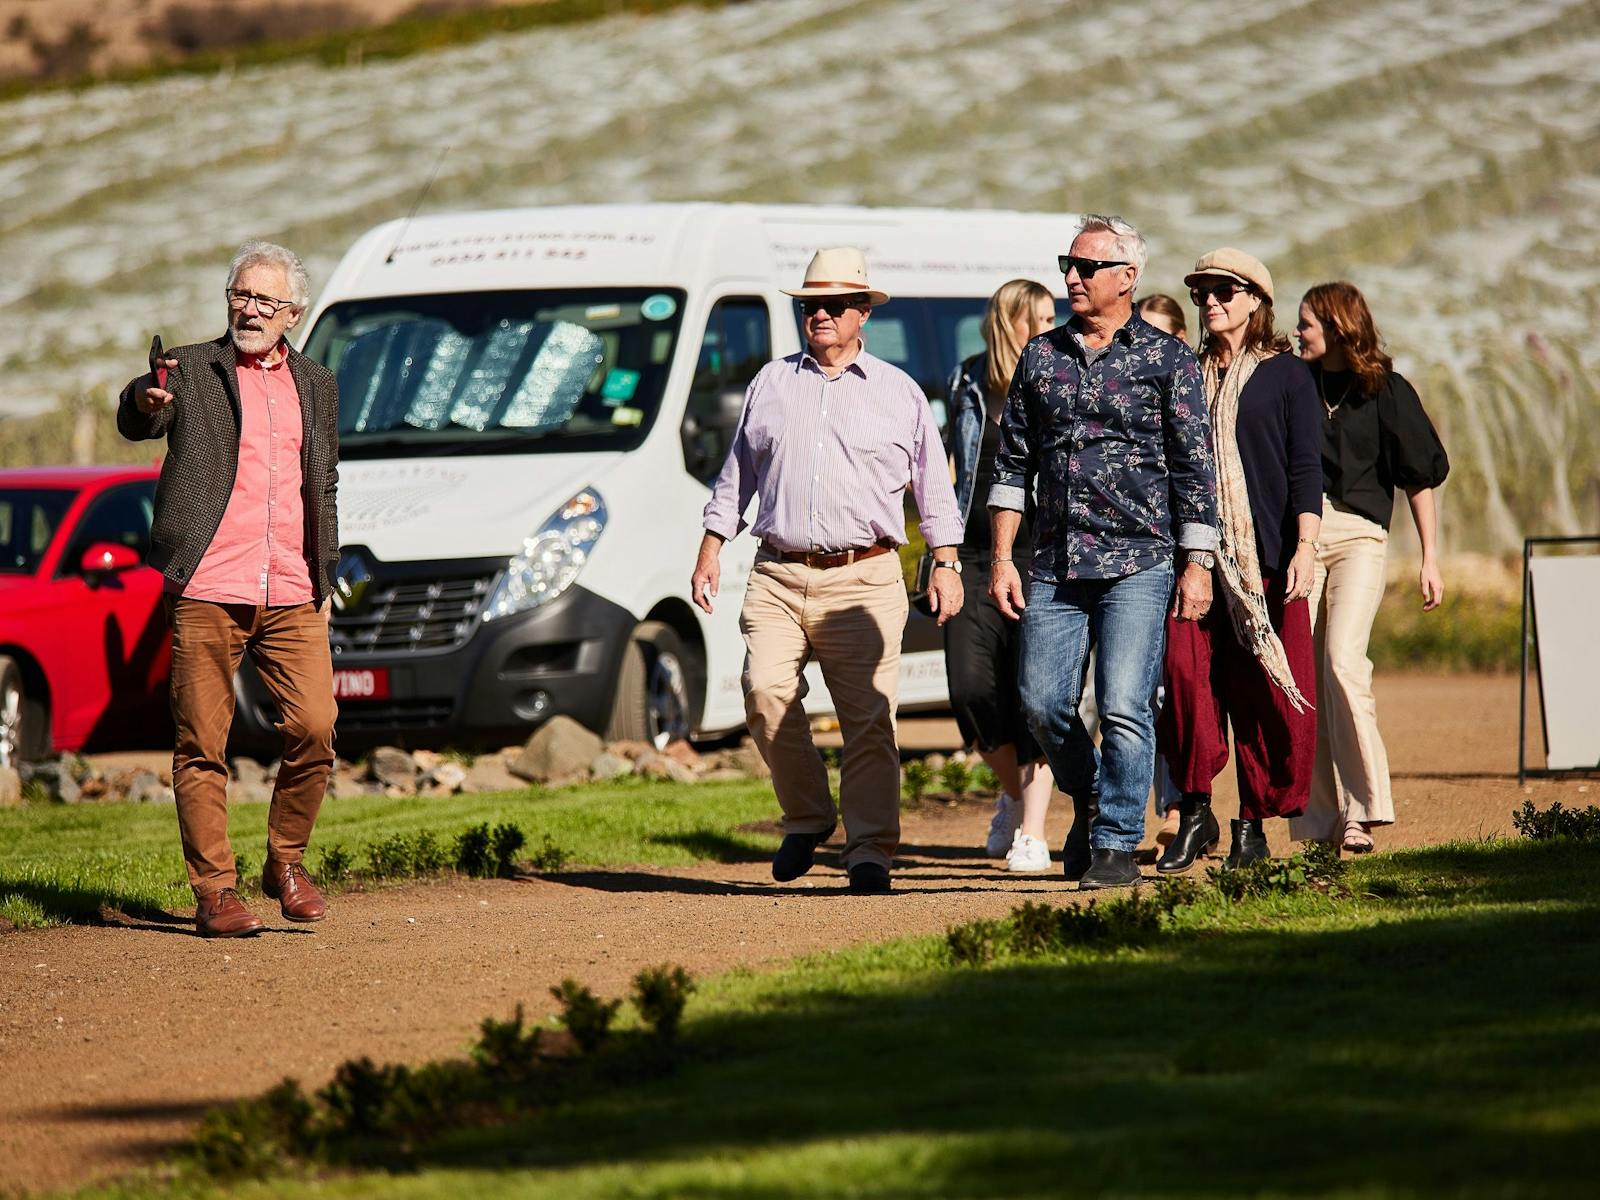 StelaVino, the best wine tasting tour in Hobart and Tasmania with guests at Derwent Estate.